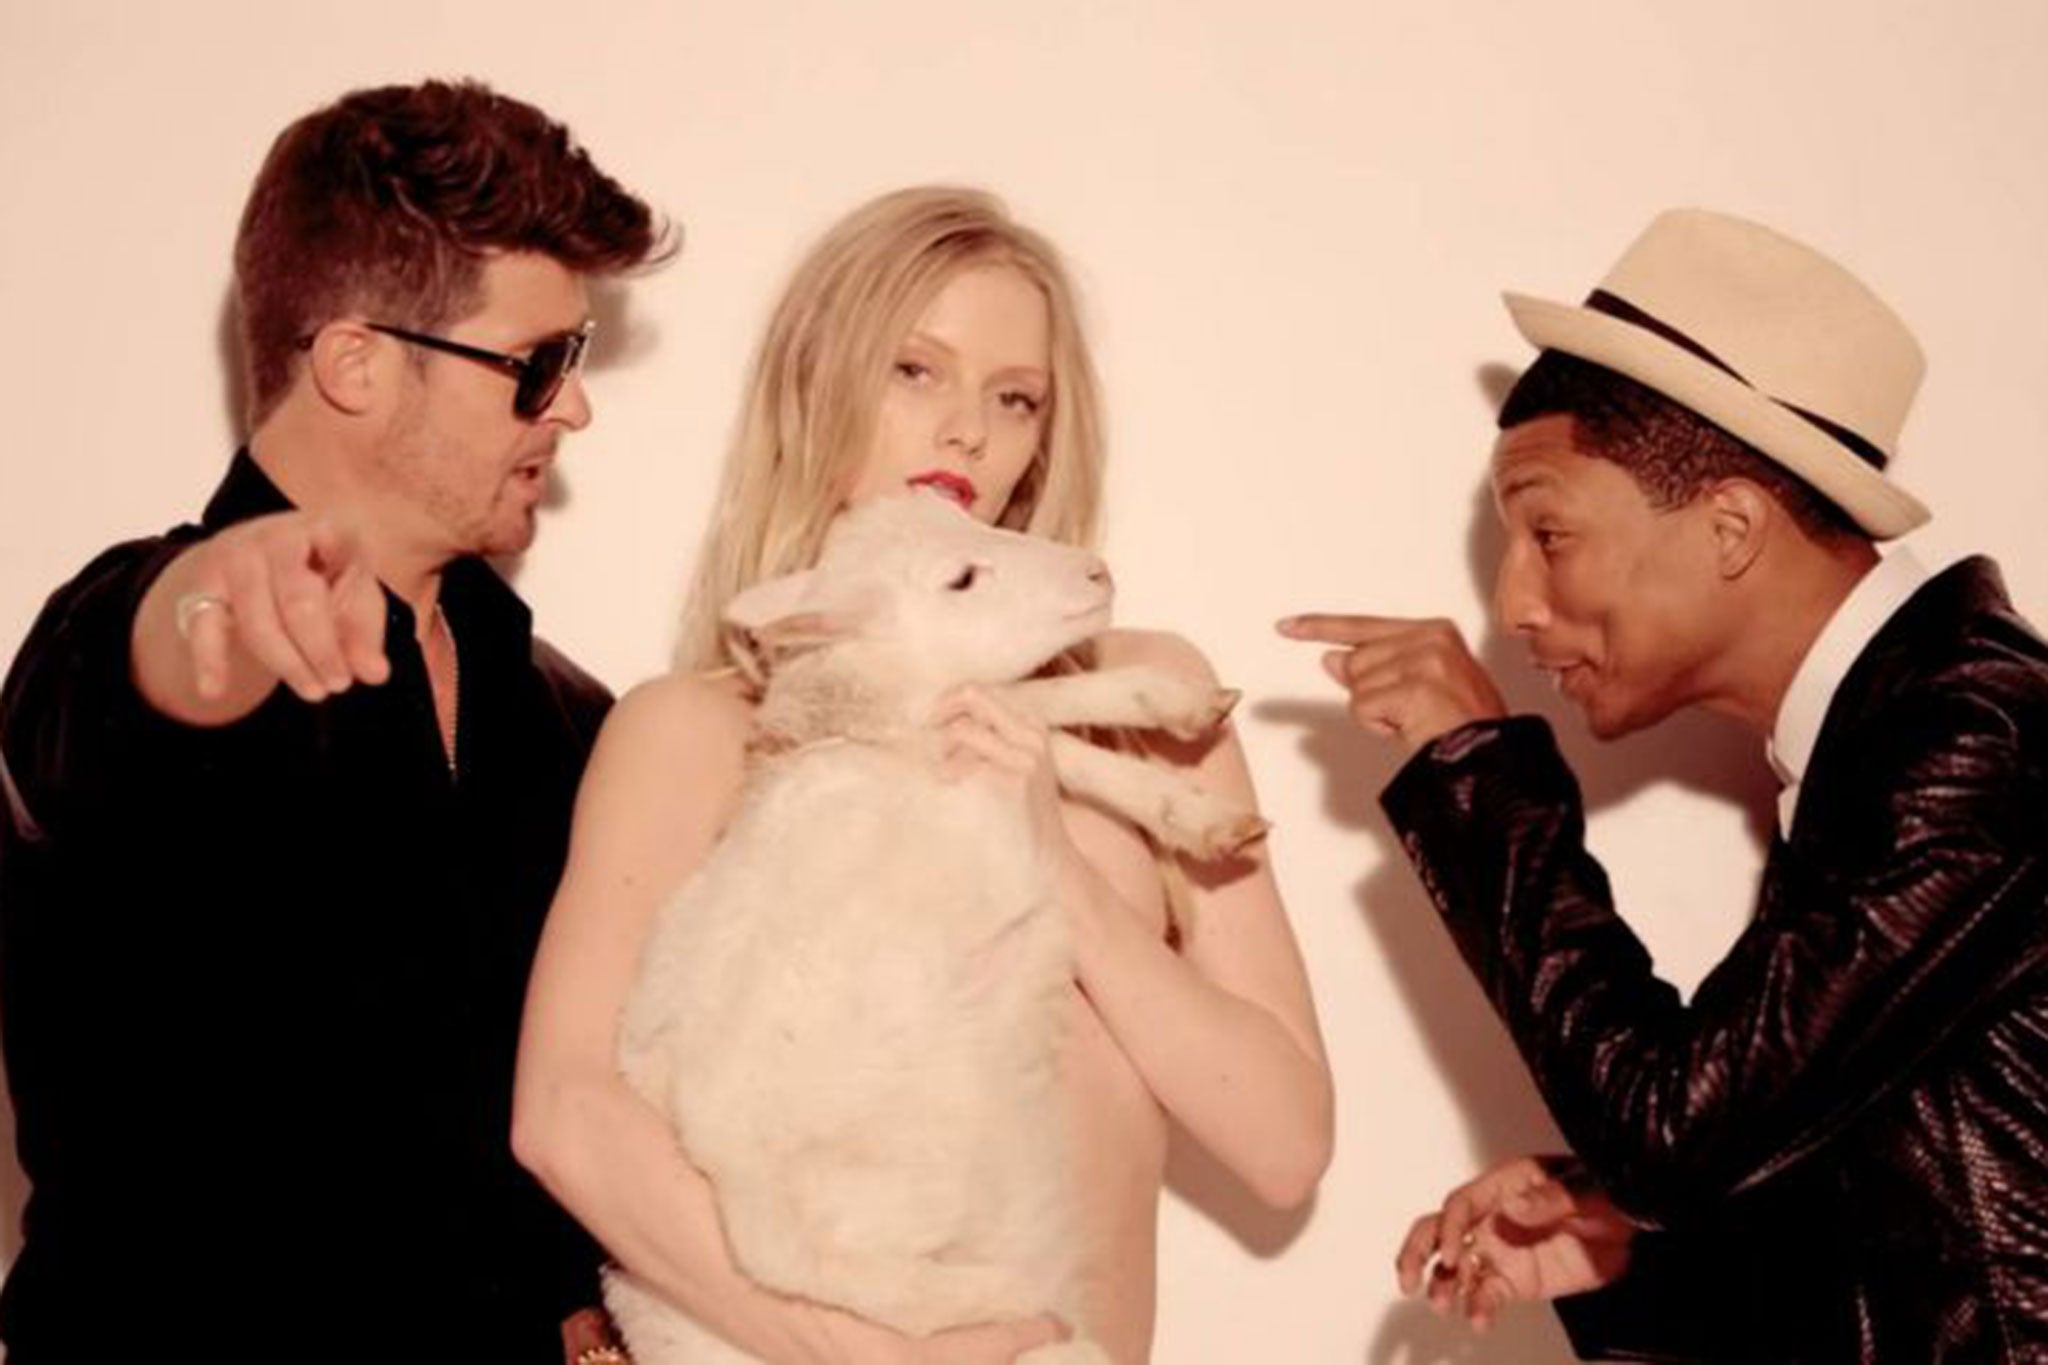 Robin Thicke and Pharell Williams in the video of the song, which has been accused of justifying rape